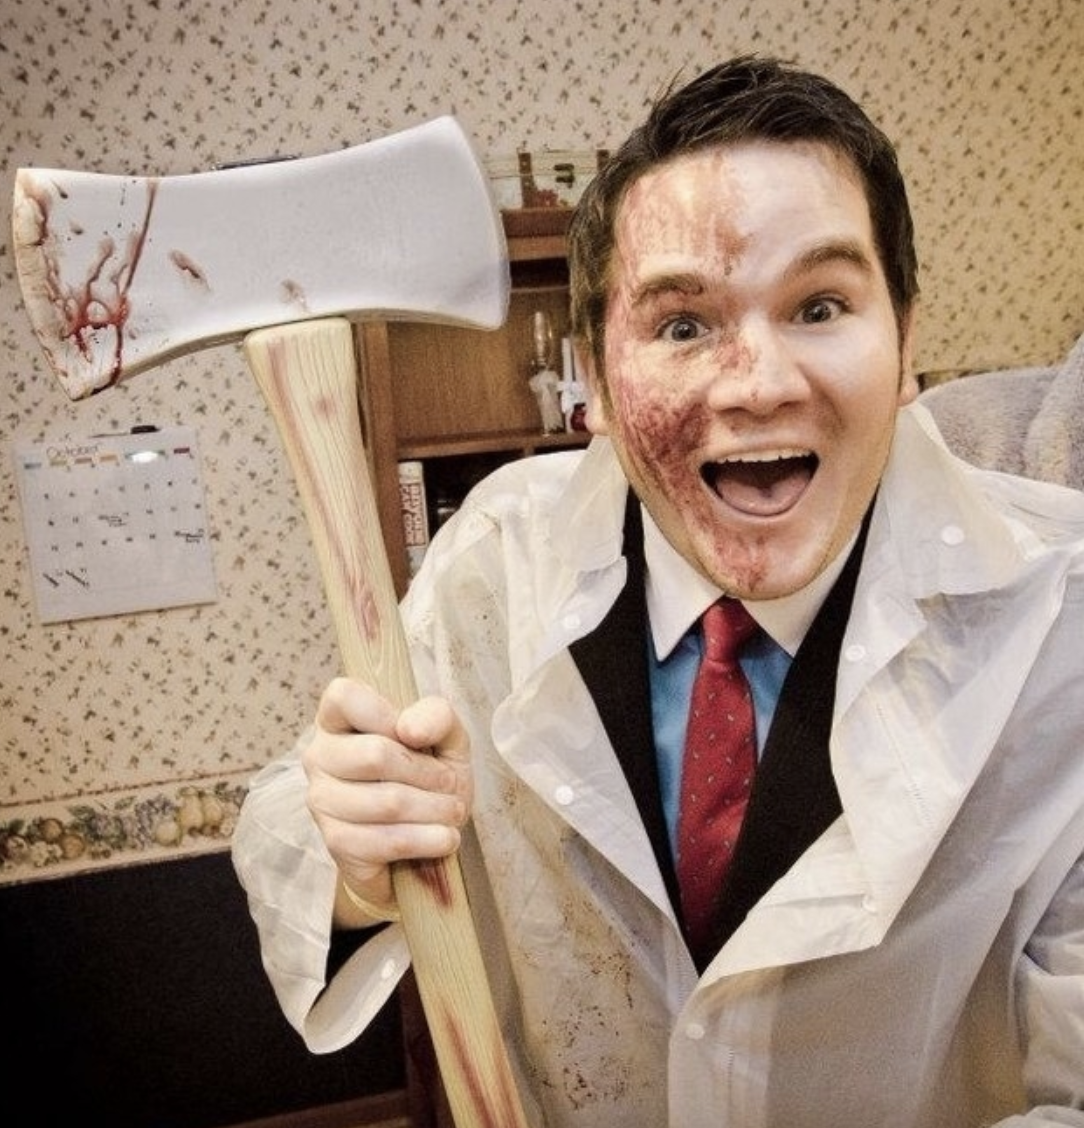 Someone wearing a plastic coat covered in blood while holding an axe